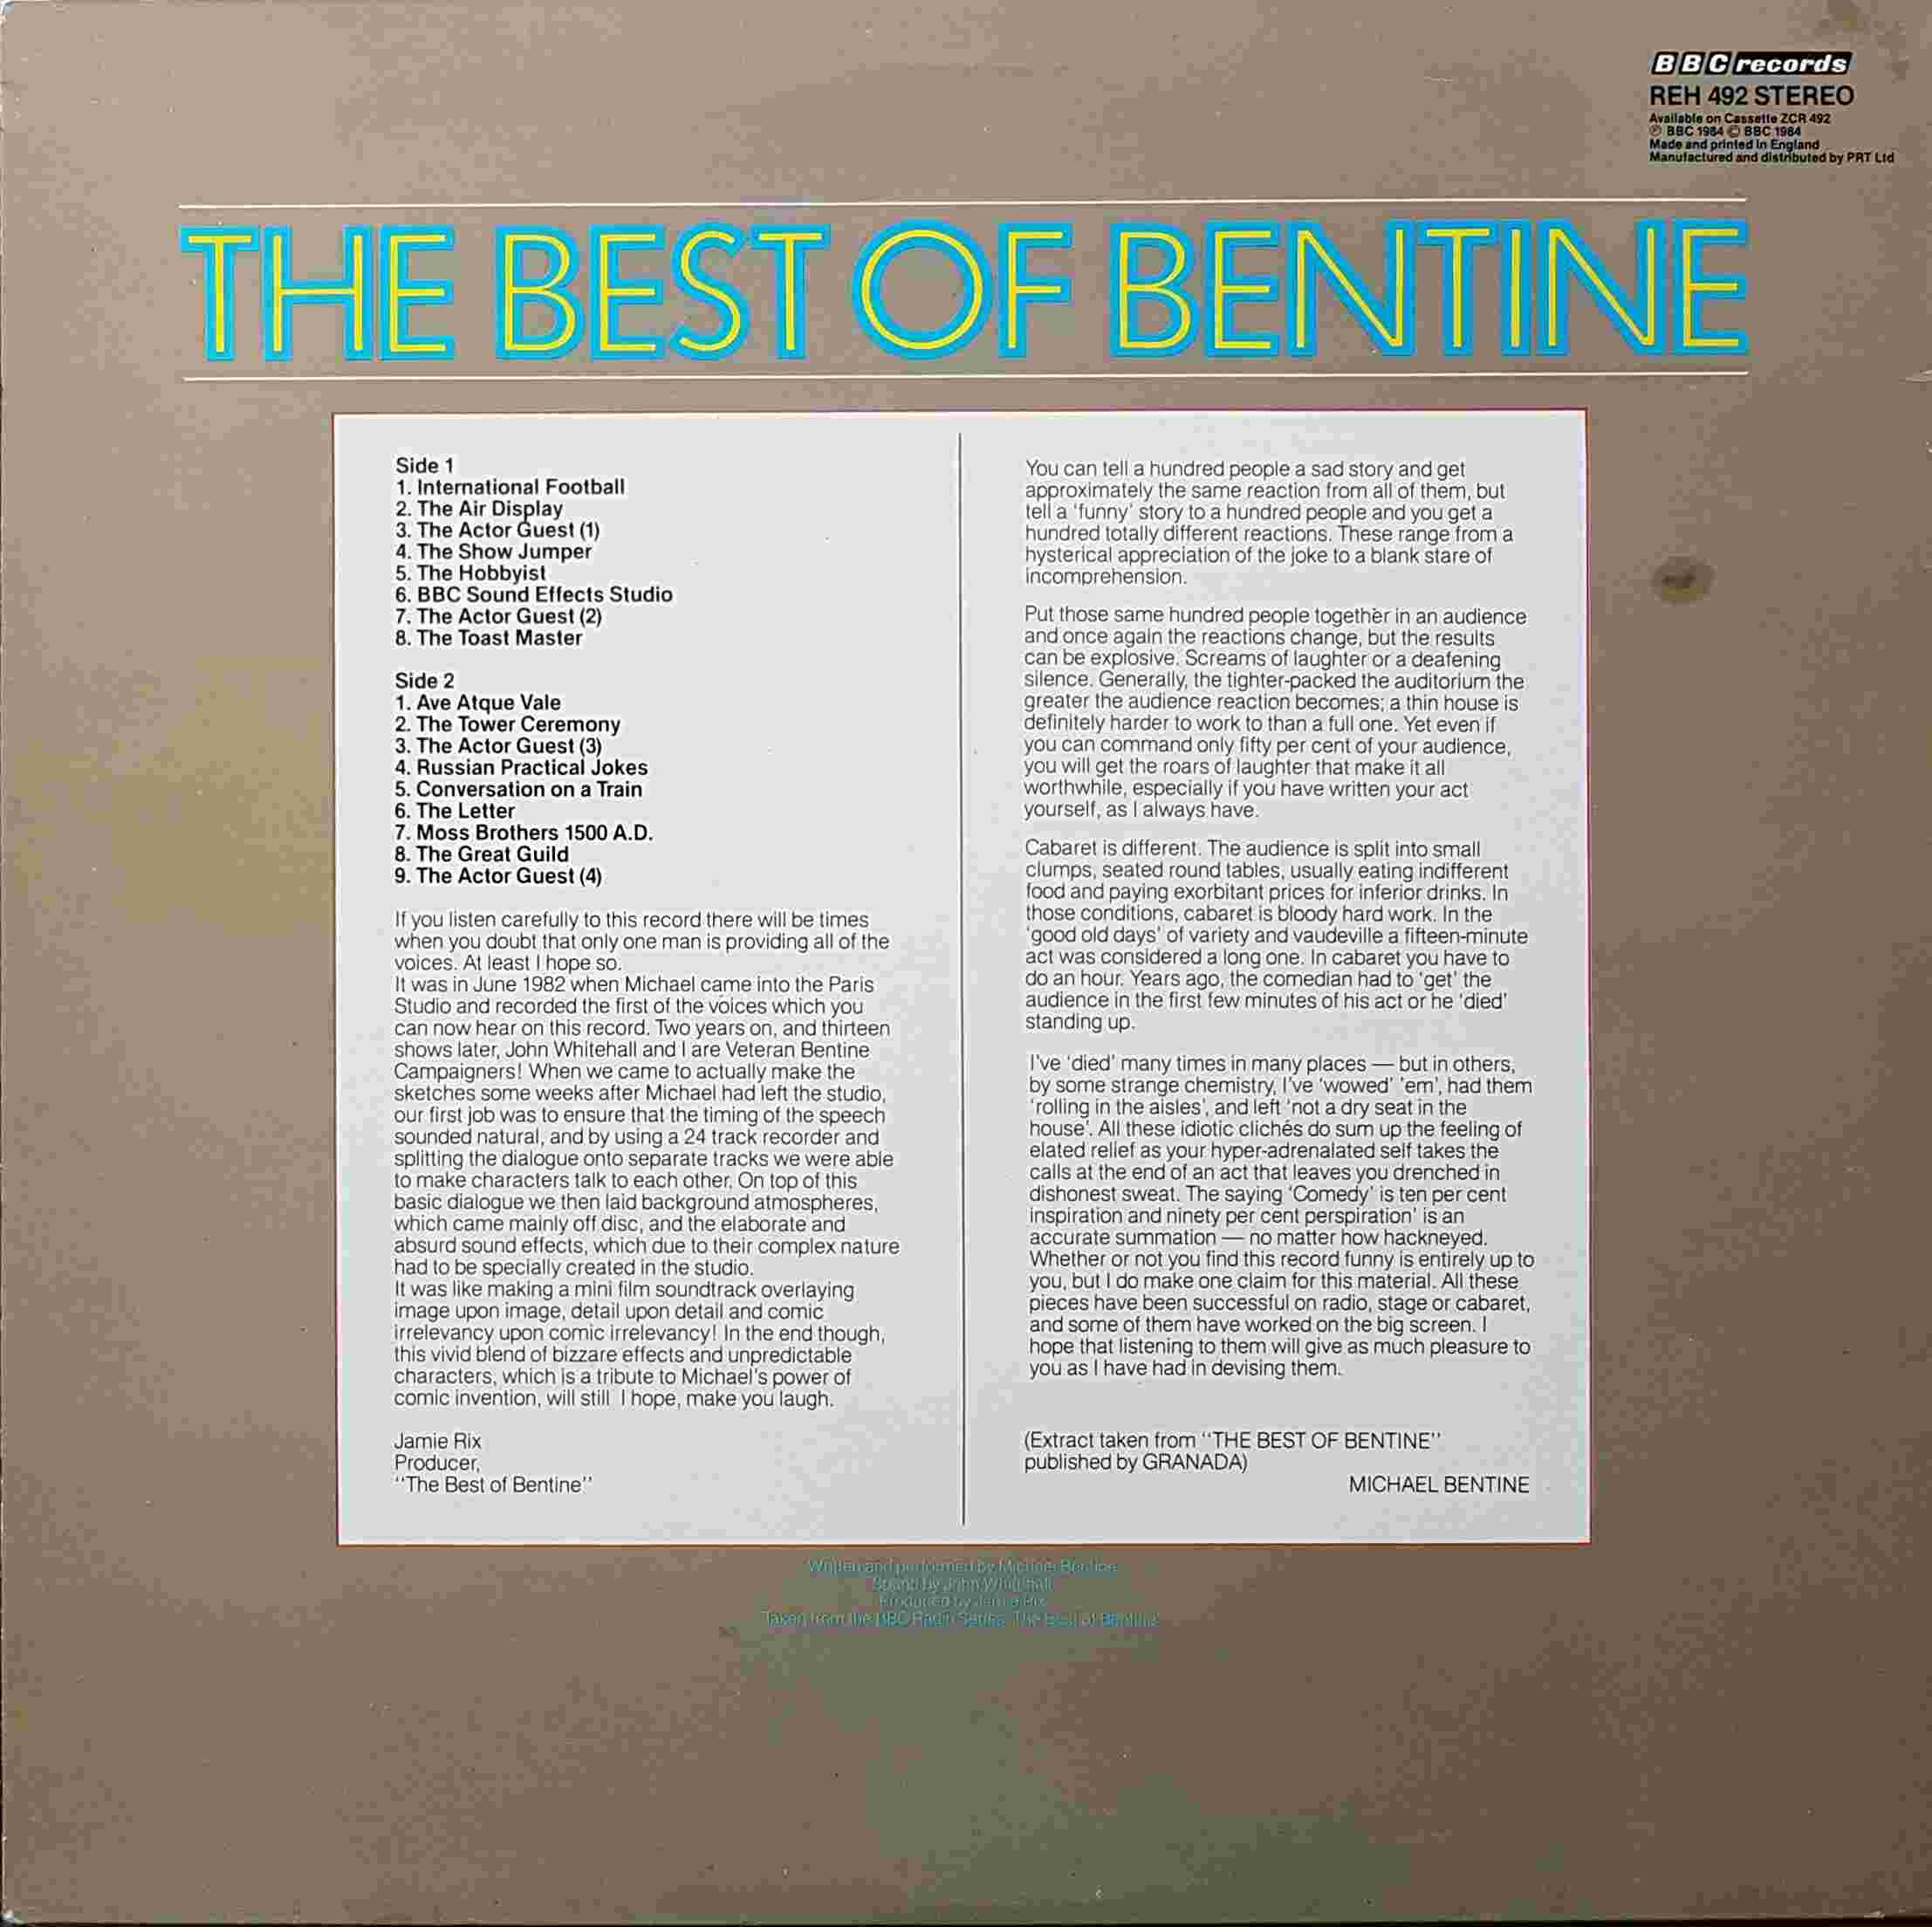 Picture of REH 492 Best of Bentine by artist Michael Bentine from the BBC records and Tapes library